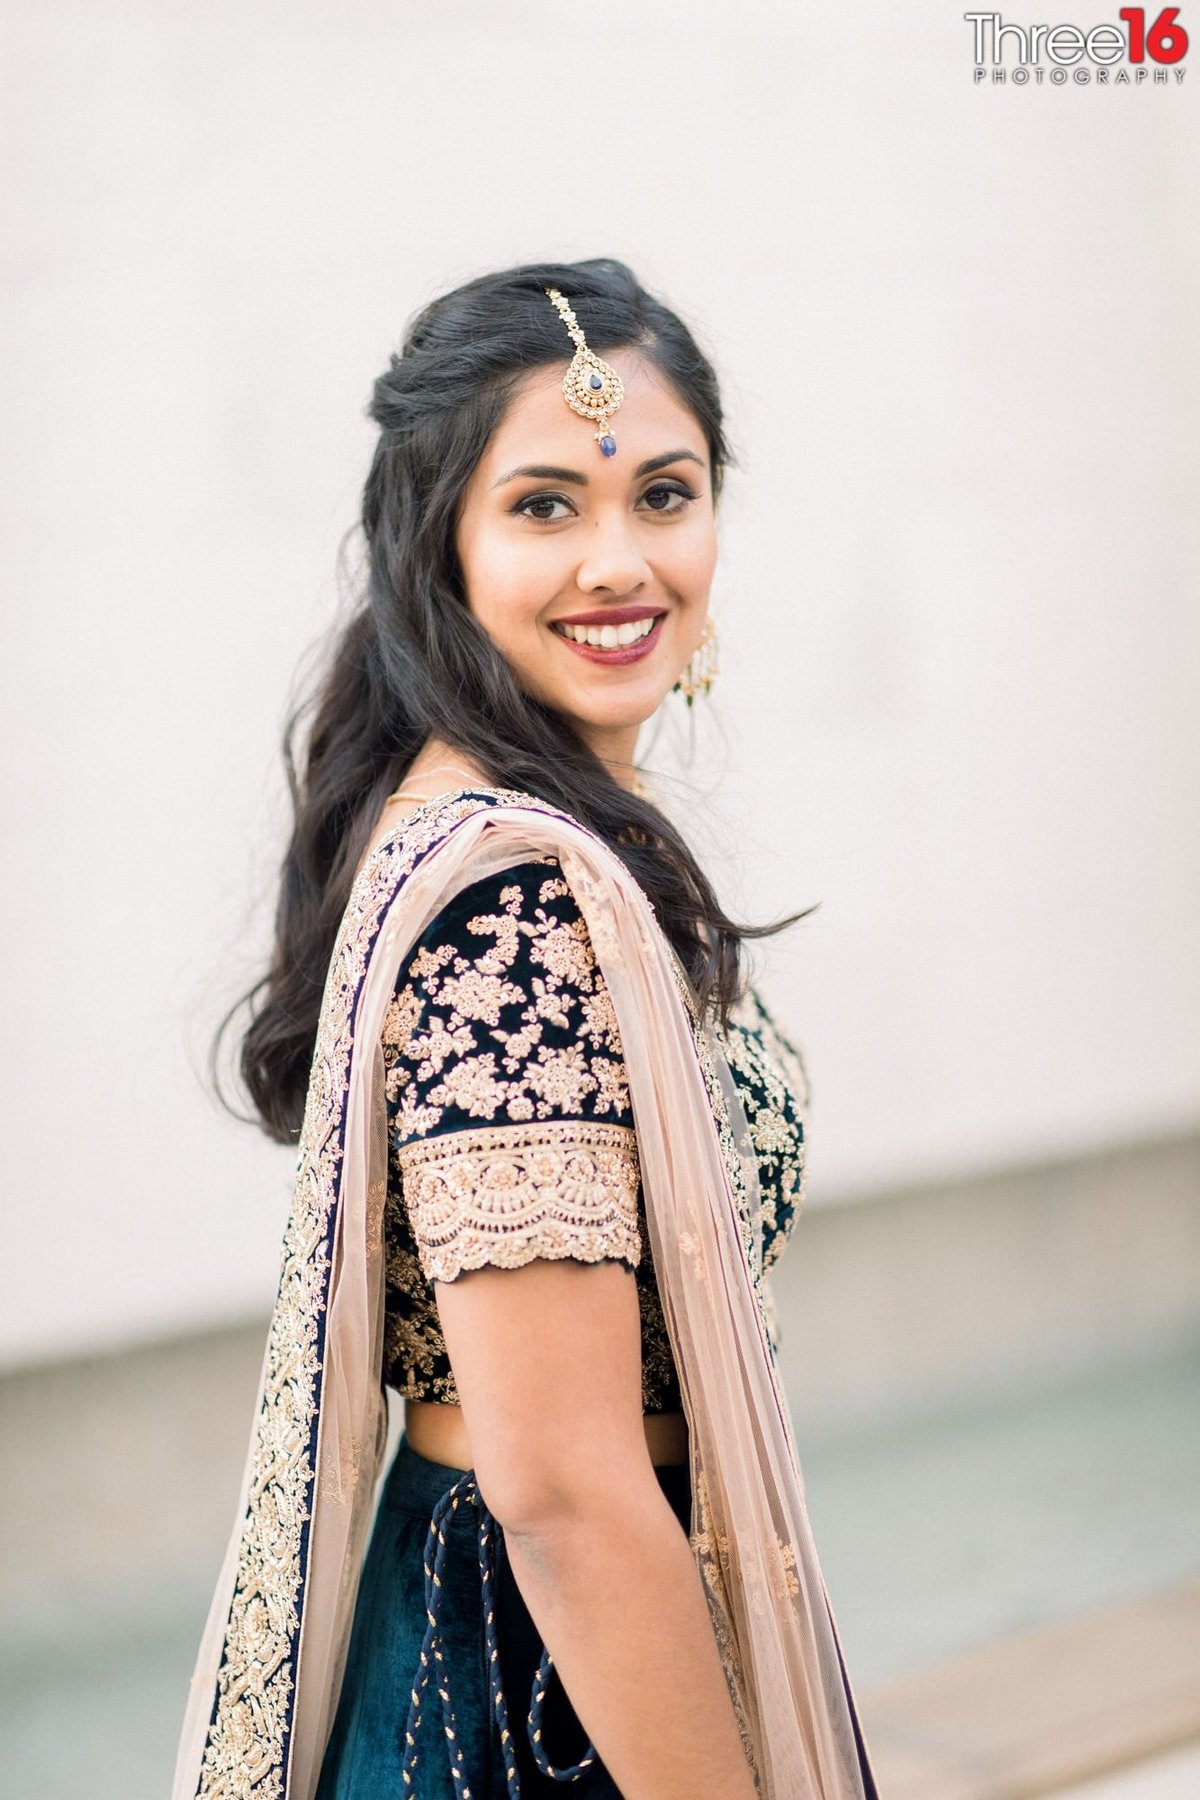 Beautiful Indian Bride in traditional wedding dress